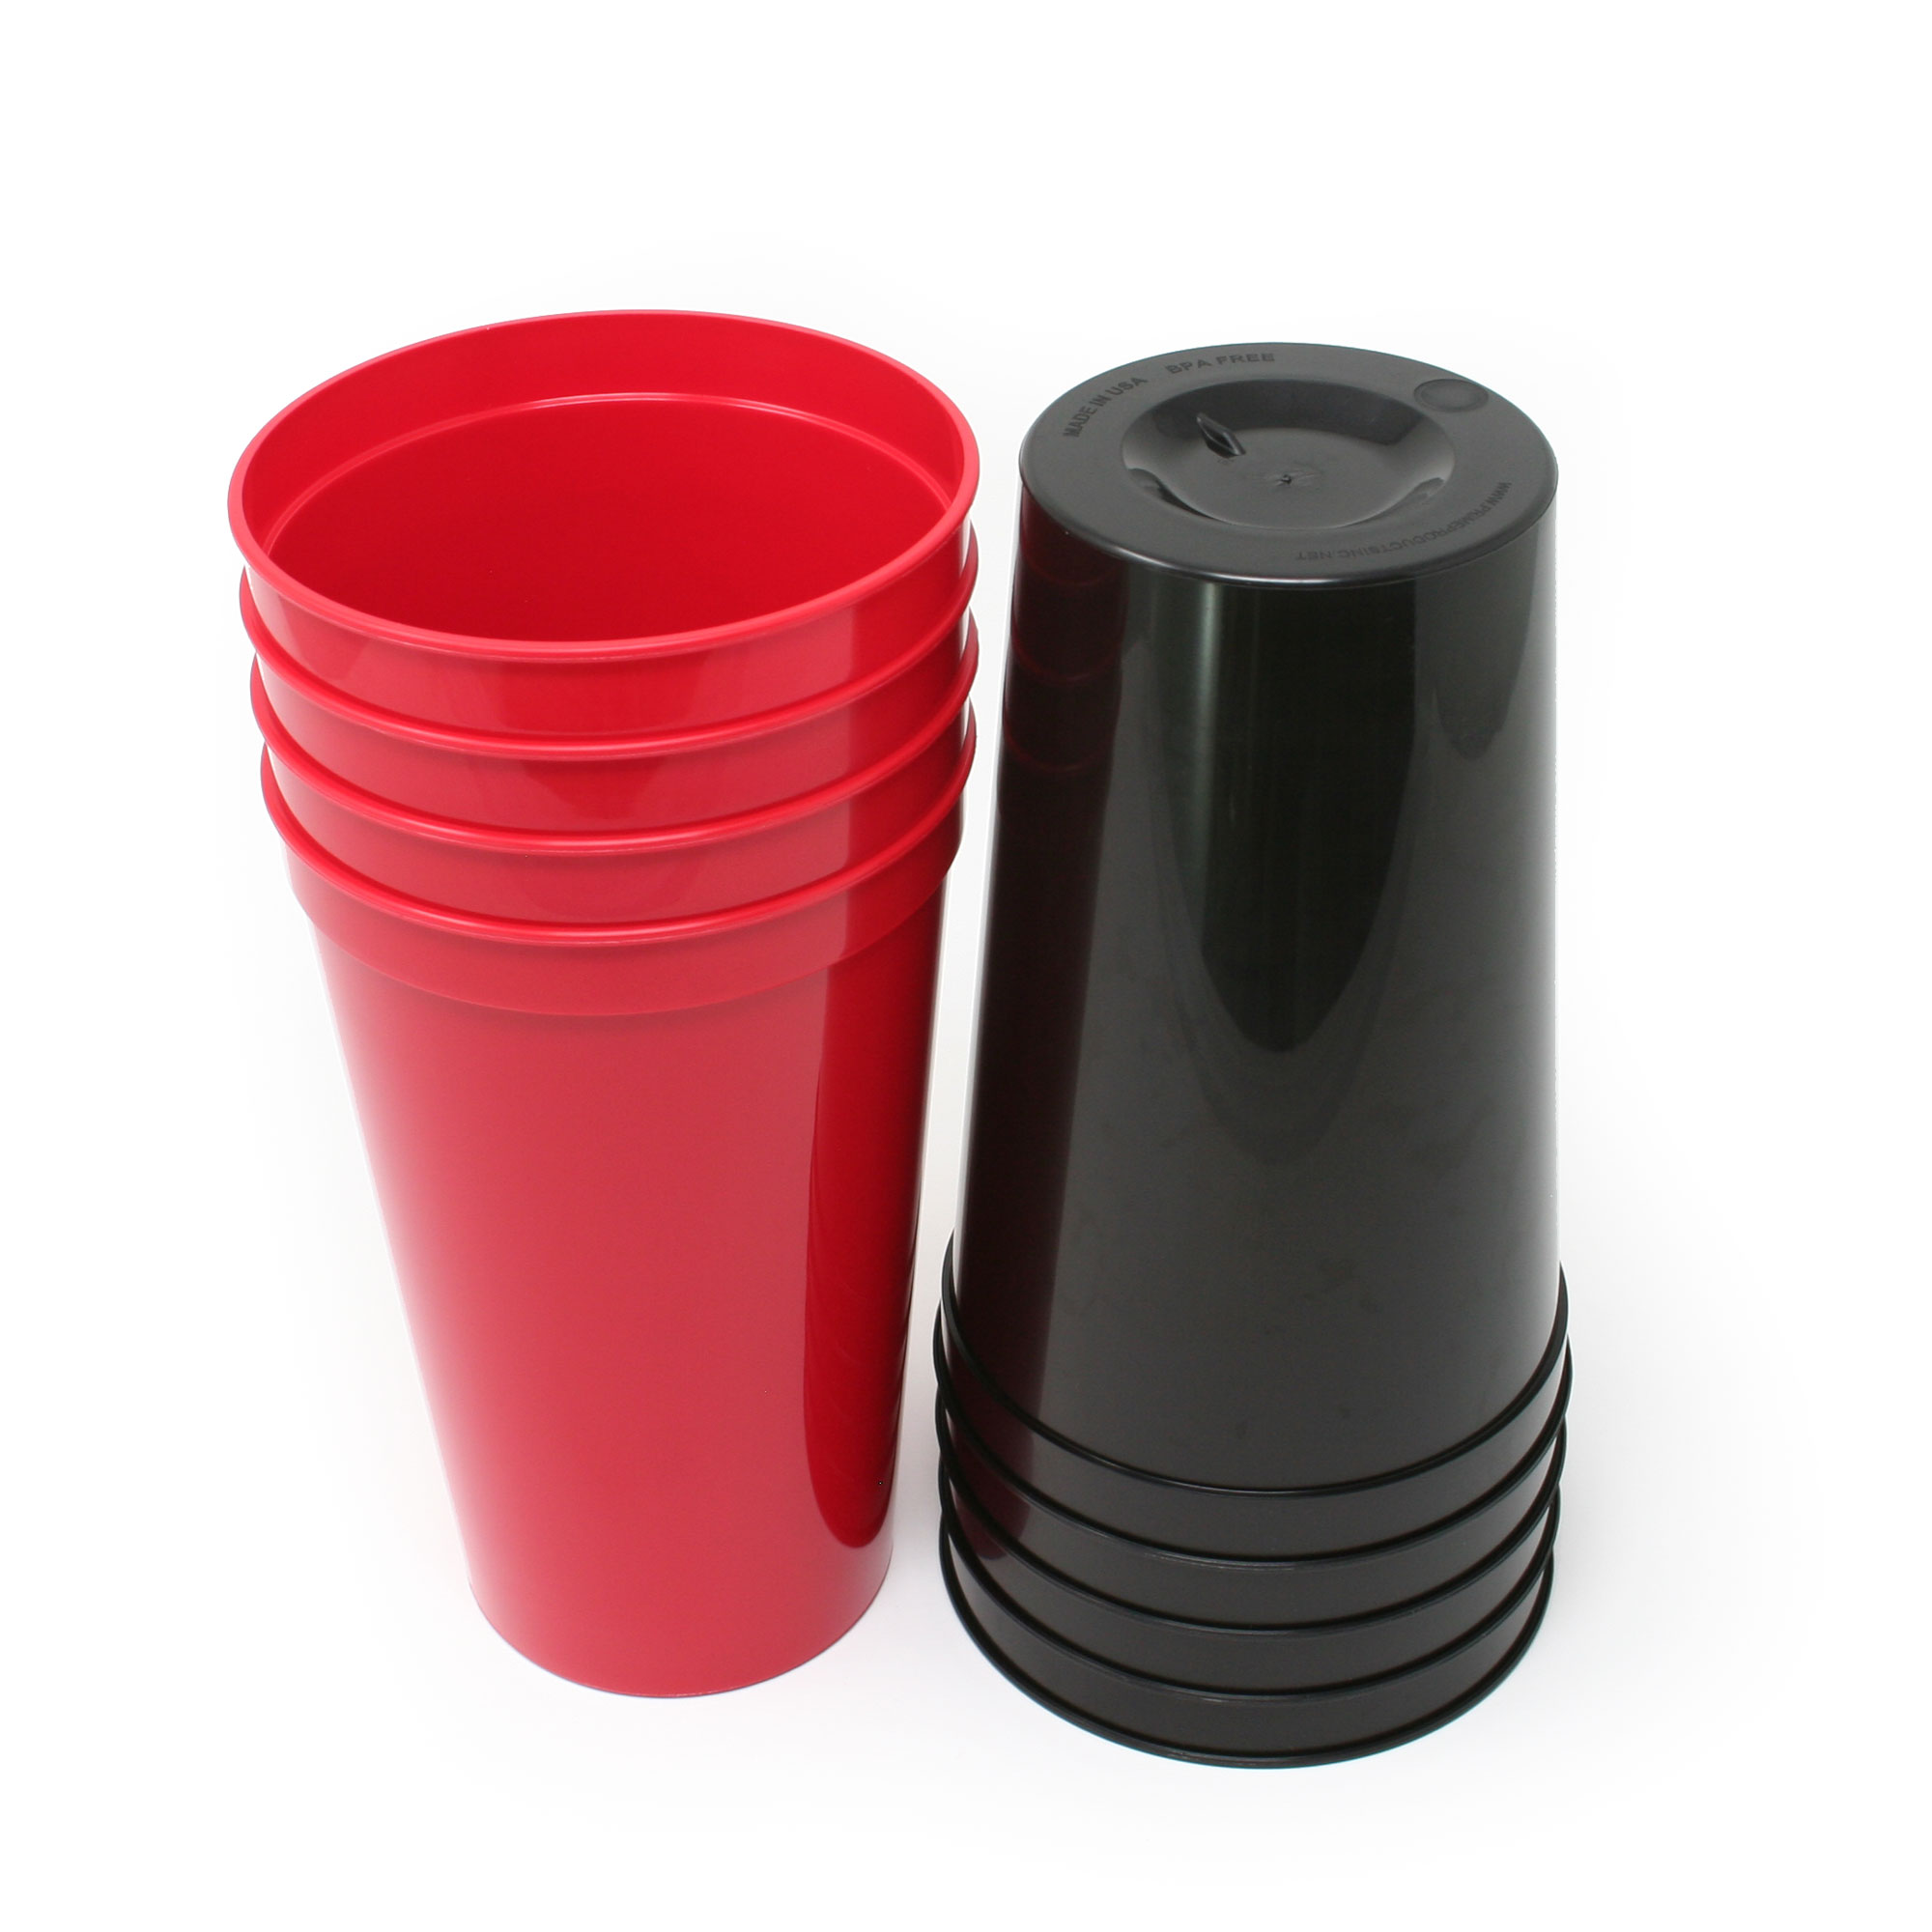  CSBD Stadium 12 oz. Plastic Cups, 10 Pack, Blank Reusable Drink  Tumblers for Parties, Events, Marketing, Weddings, DIY Projects or BBQ  Picnics, No BPA (Red) : Health & Household